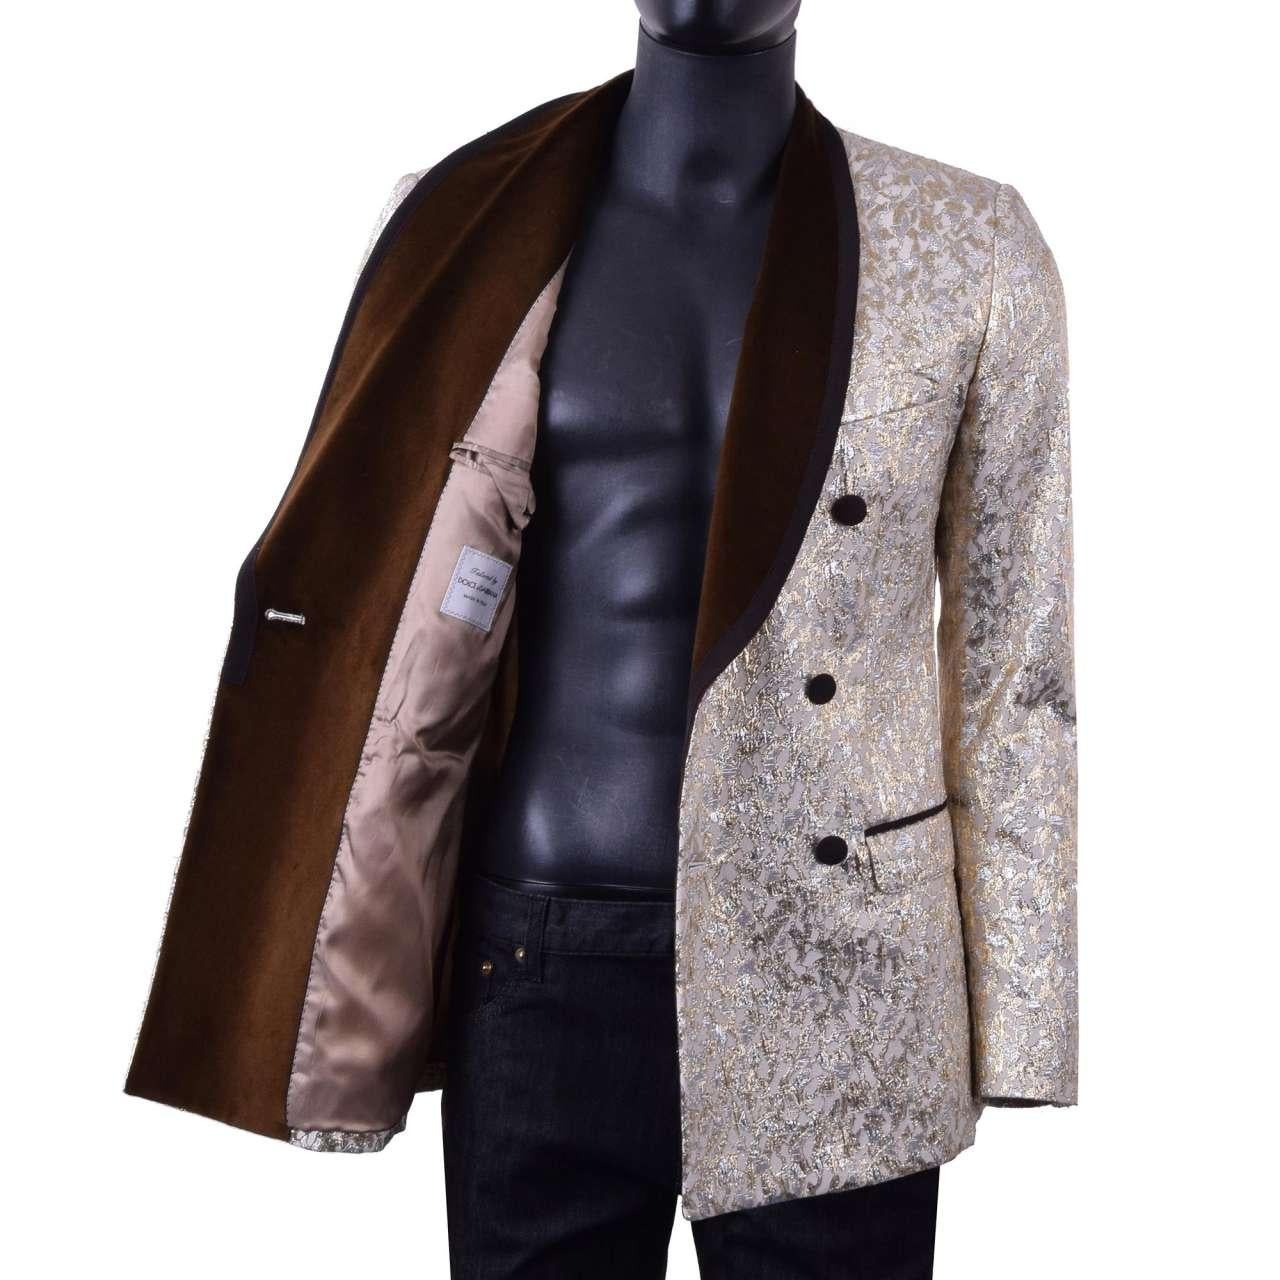 - Double-breasted baroque style jacquard tuxedo jacket with round velvet collar in beige, silver and gold by DOLCE & GABBANA Black Label - RUNWAY - Dolce & Gabbana Fashion Show - Former RRP: EUR 2.400 - Slim Fit - MADE in ITALY - New with Tag -